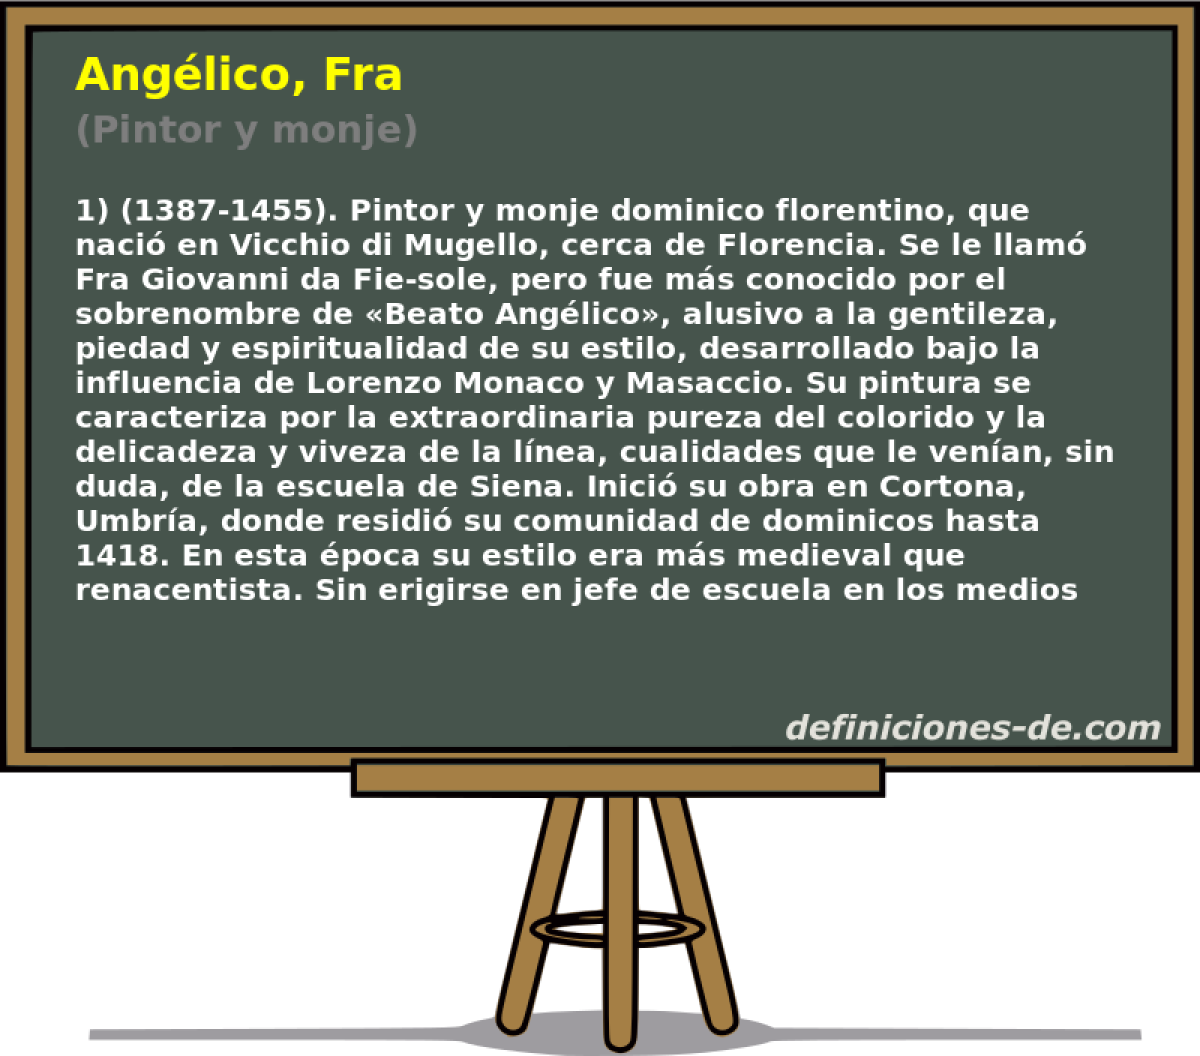 Anglico, Fra (Pintor y monje)